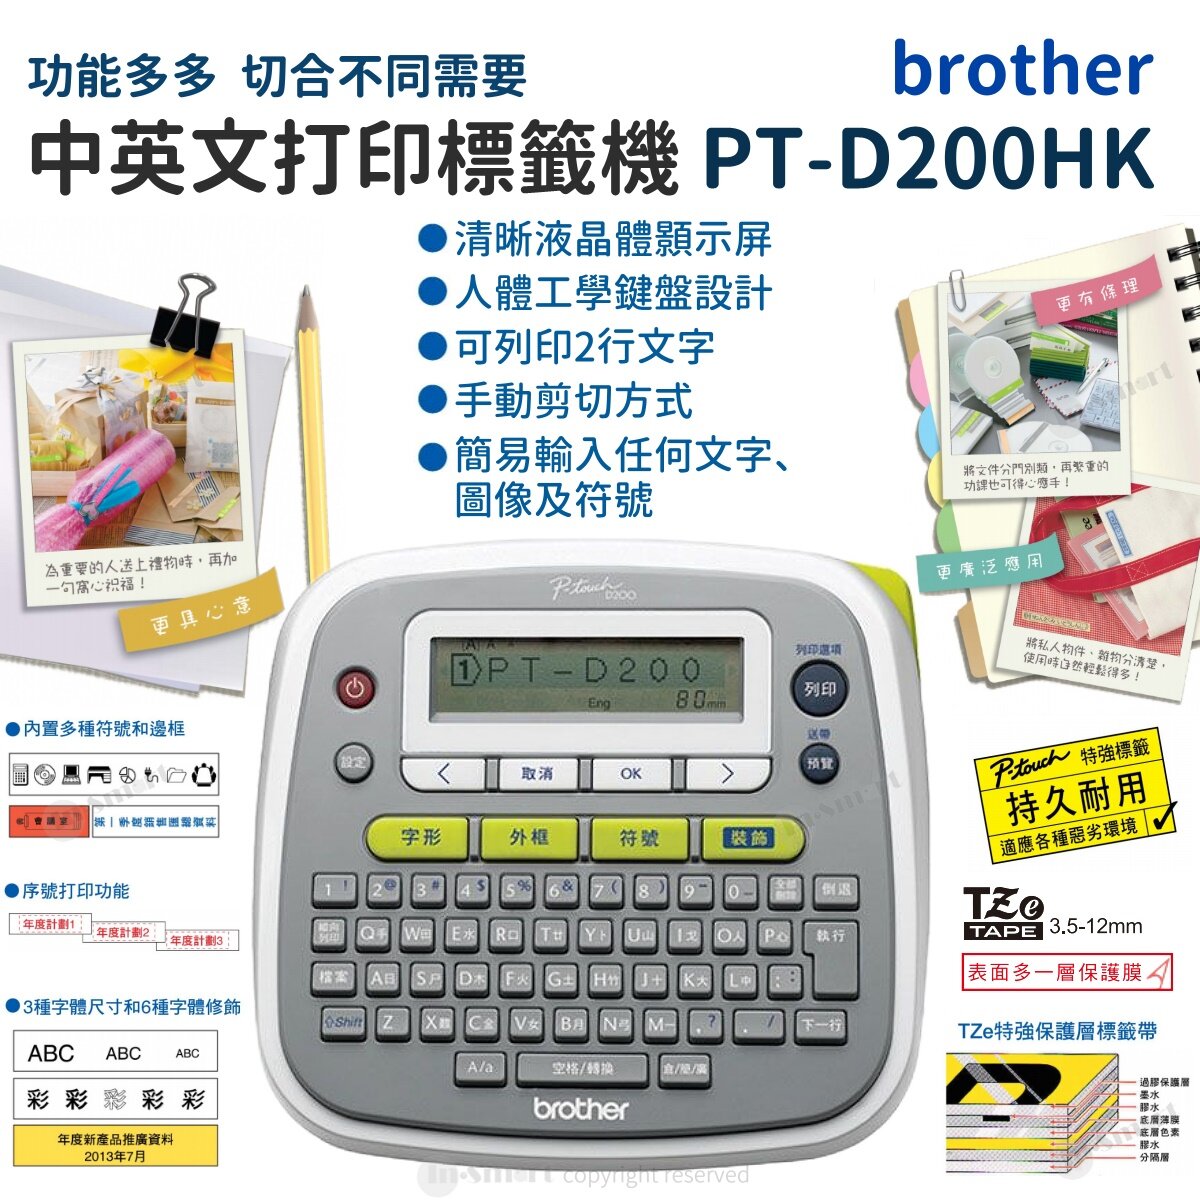 PT-D200HK Compact Stylish Labeller (Chi Version) Can Input Chinese & English